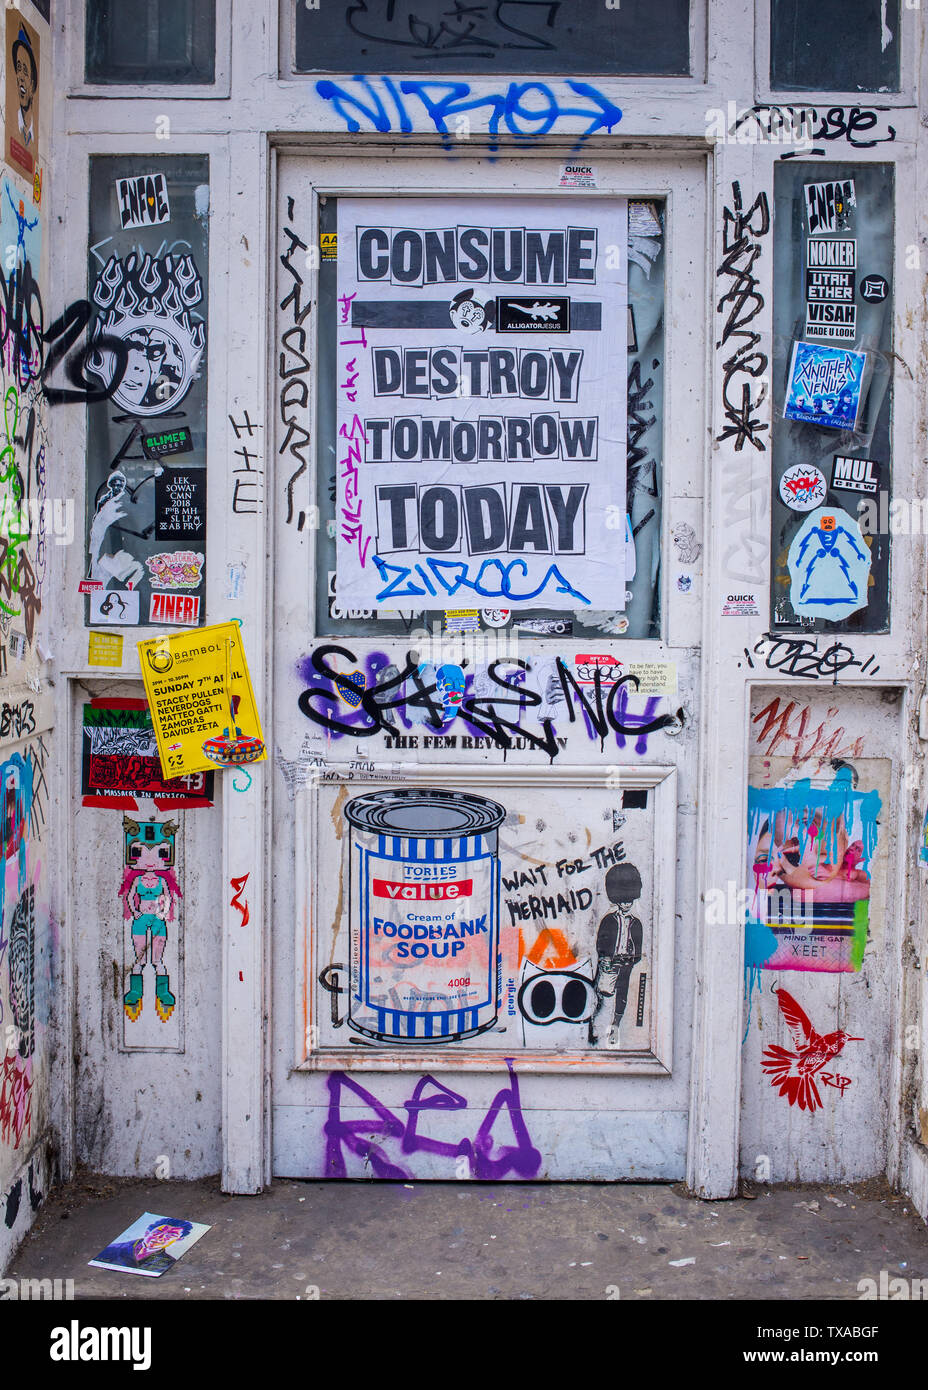 Door covered in graffiti and stickers with poster from environmental campaign saying Consume destroy tomorrow today in Shoreditch, London Stock Photo